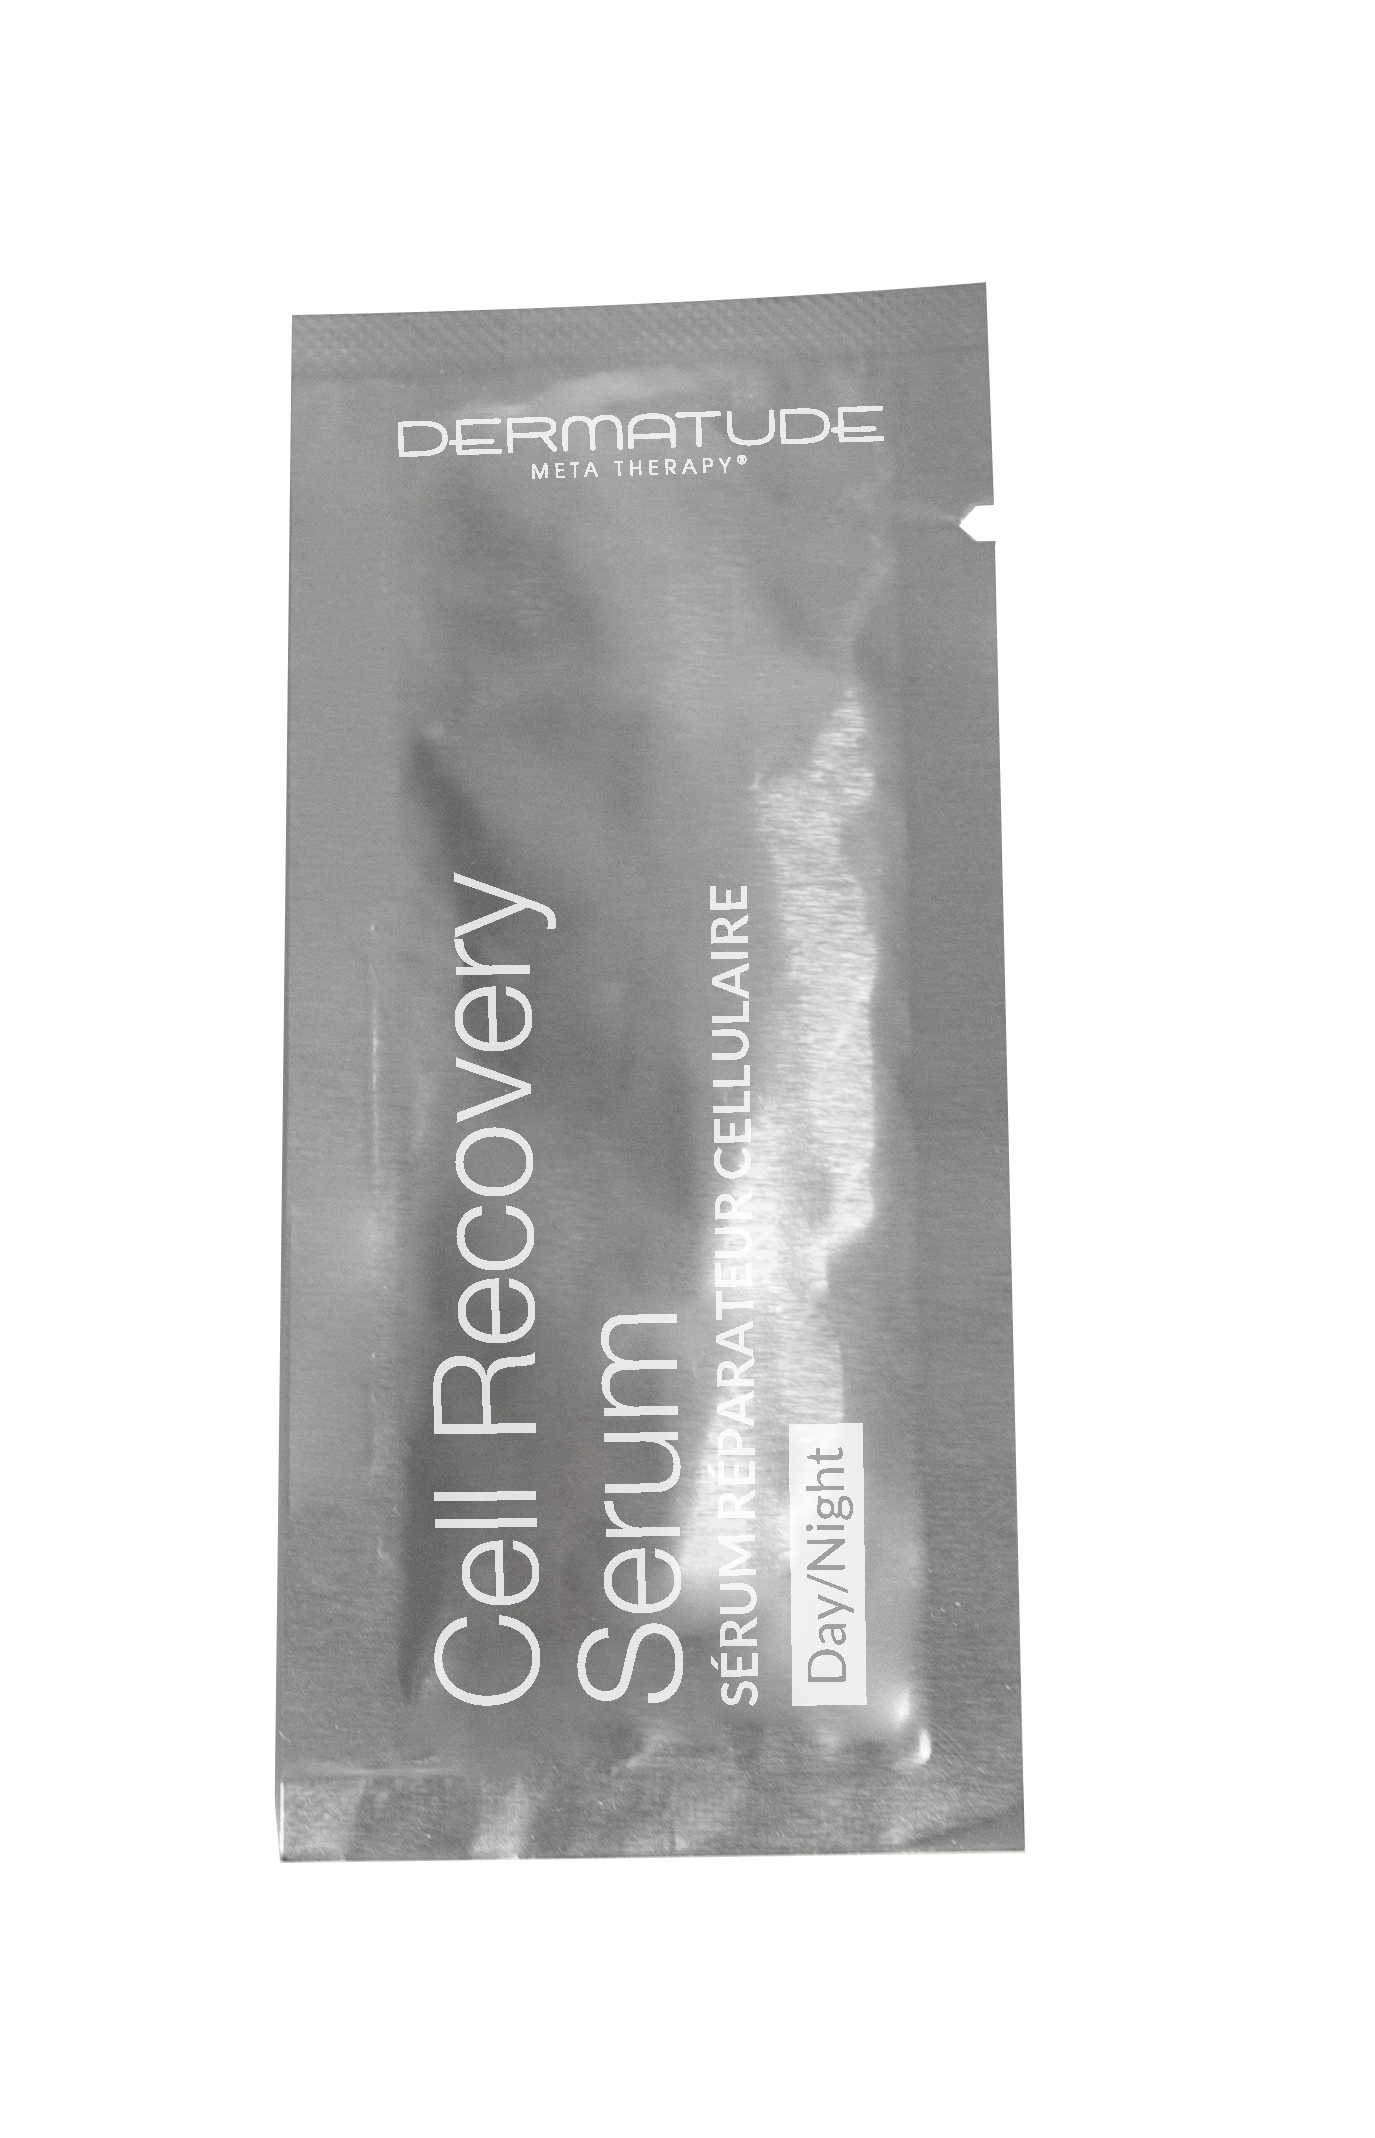 (Do not sell) Dermatude Cell Recovery Serum Sample 2 ml - Box of 100 Pieces